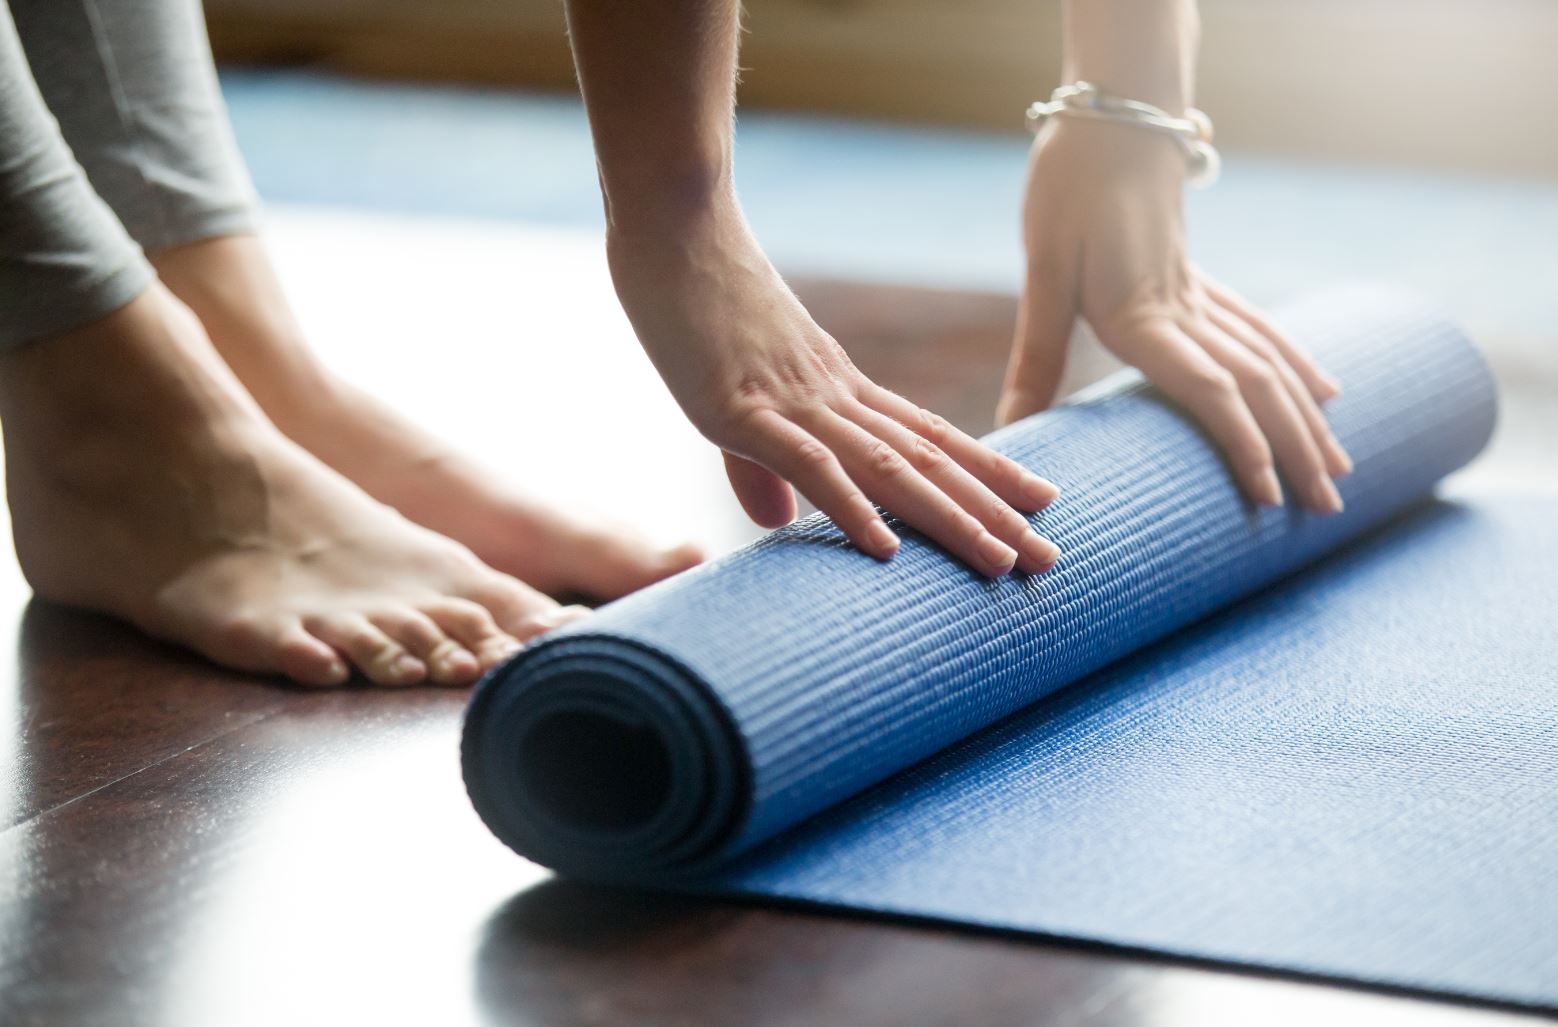 An image showing a person folding yoga mat